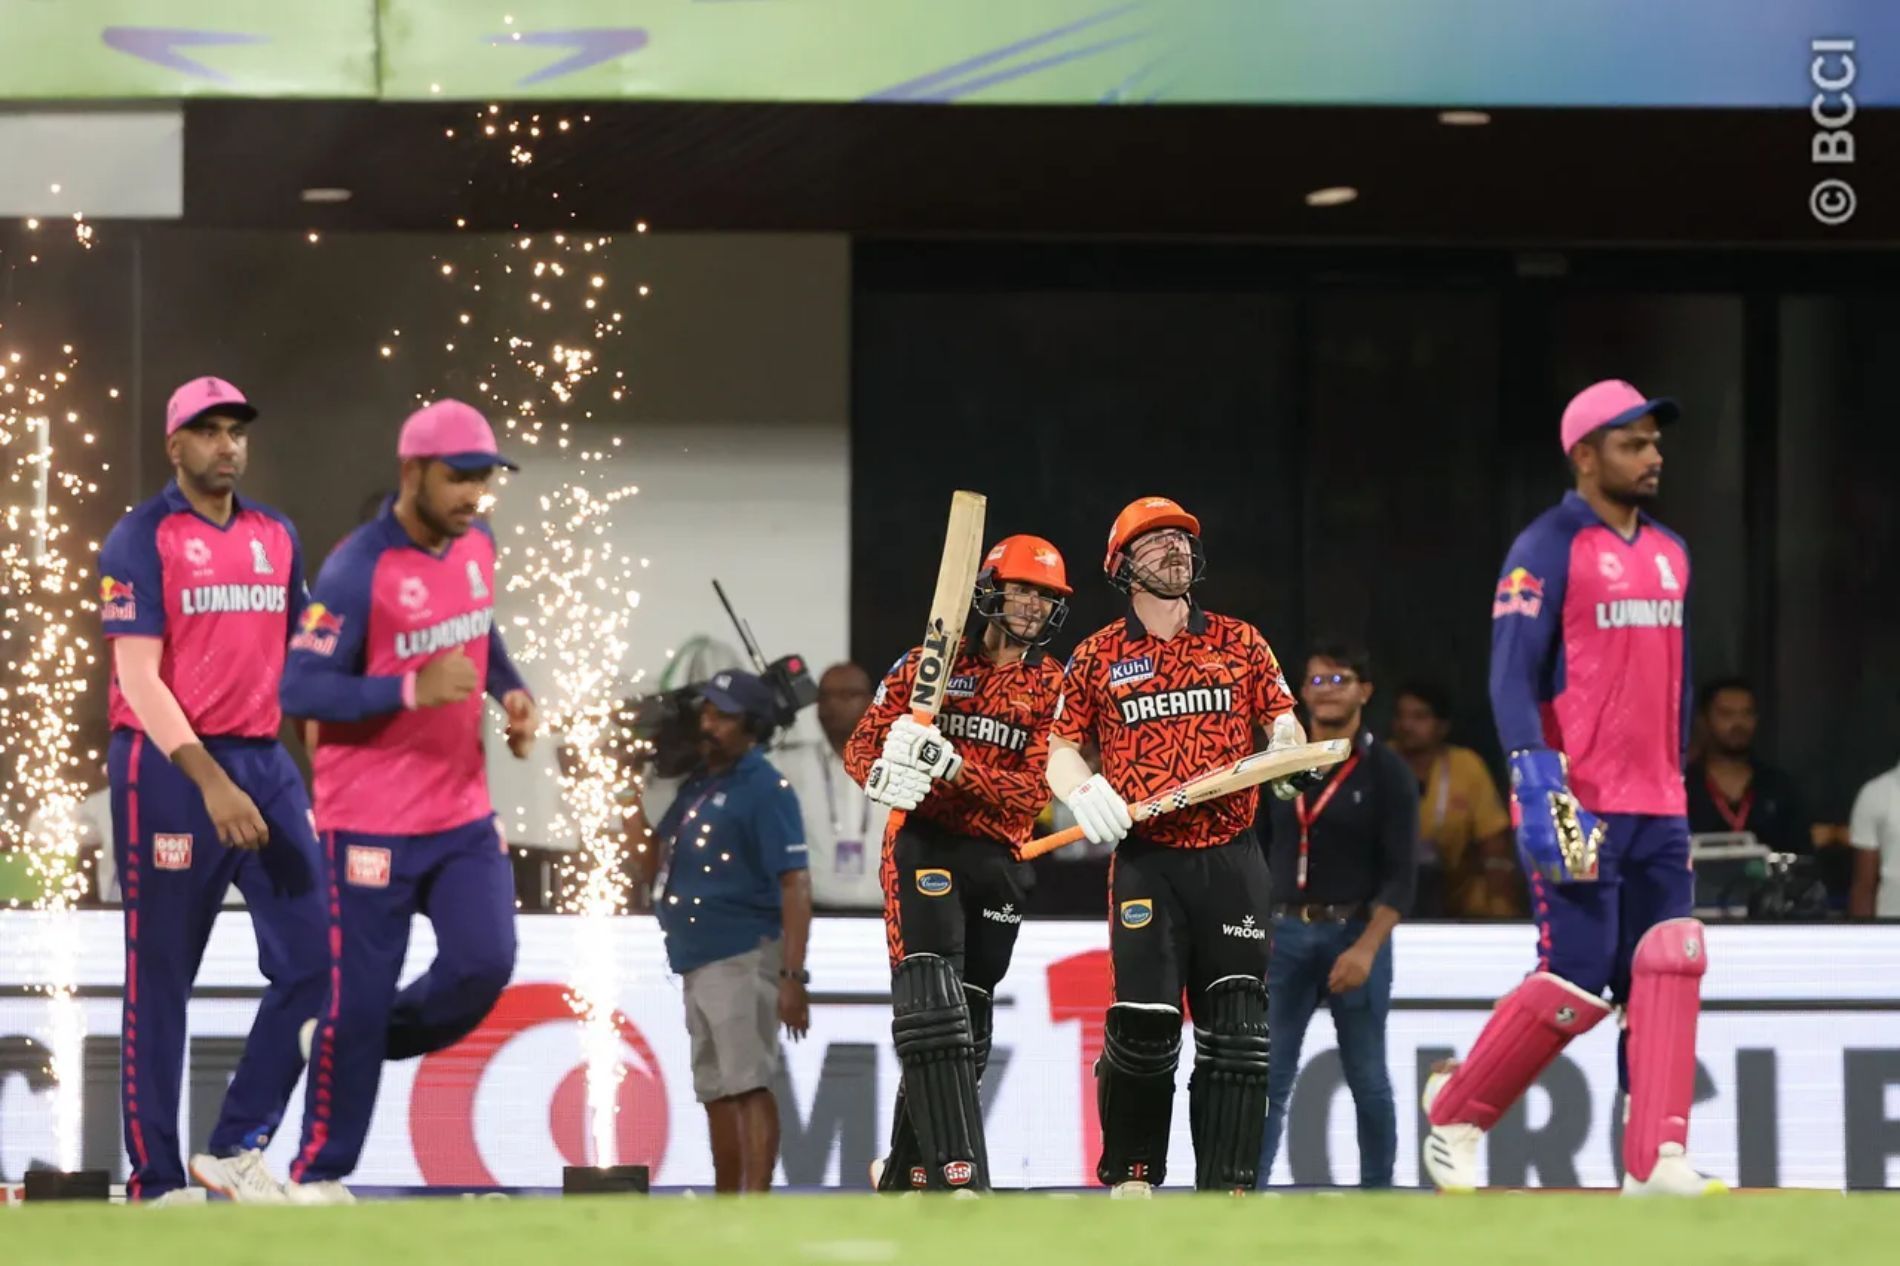 Abhishek Sharma and Travis Head have been exceptional for SRH at the top of the order. (Image Credit: BCCI/ iplt20.com)